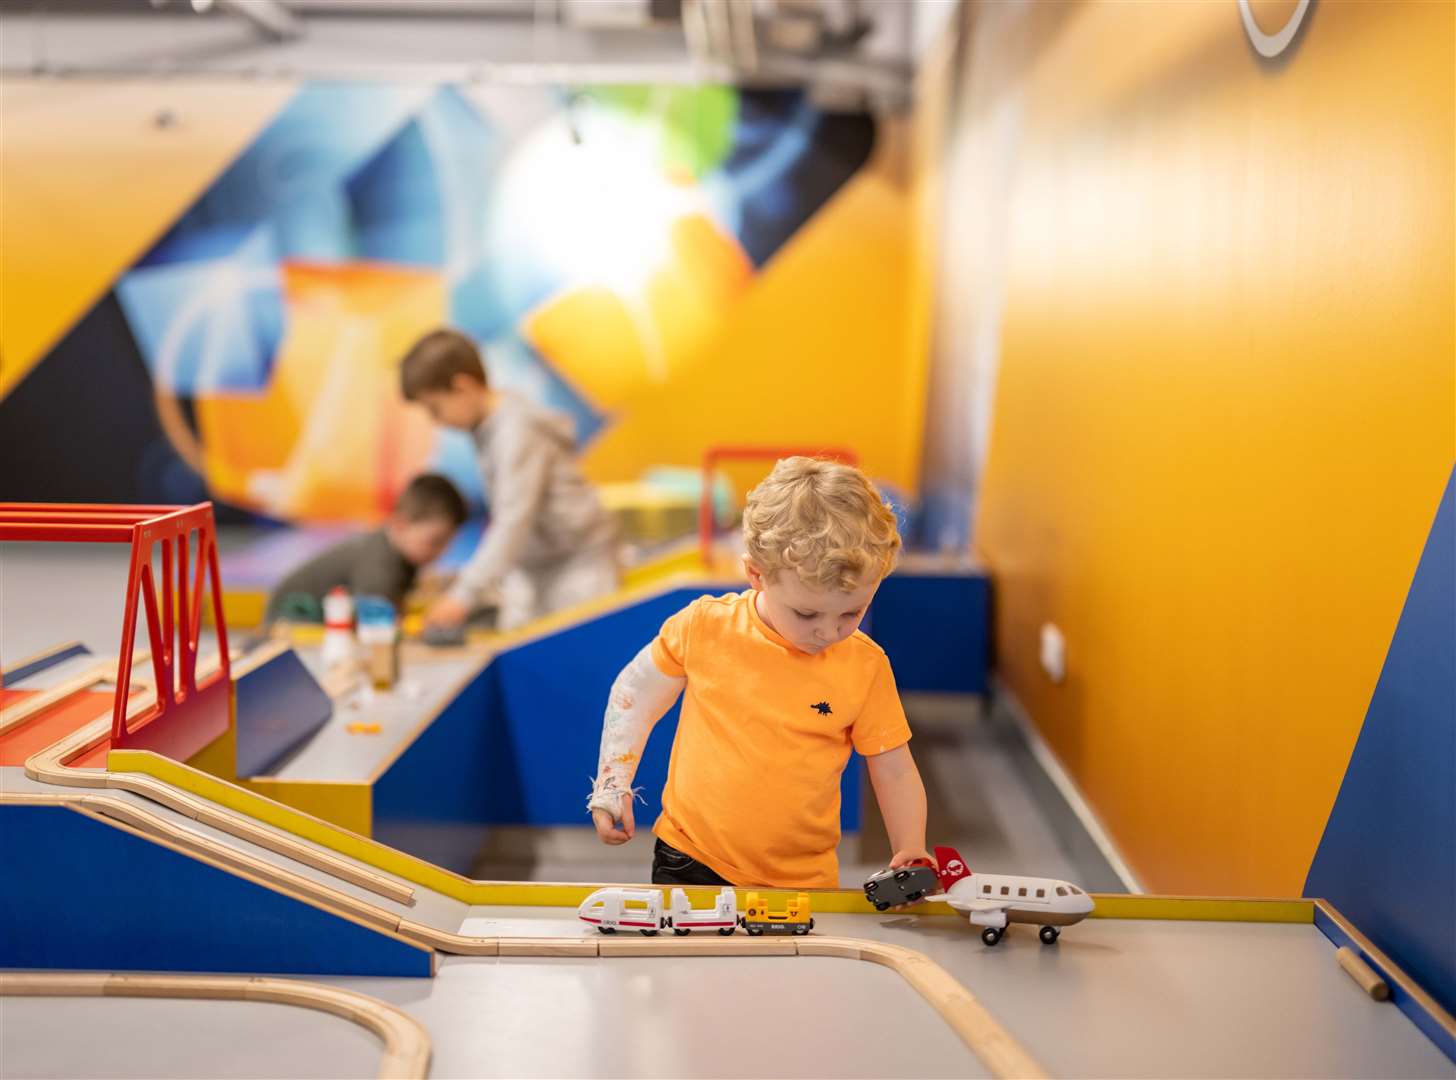 There are a variety of fun activities on offer for under-sixes at Aberdeen Science Centre.